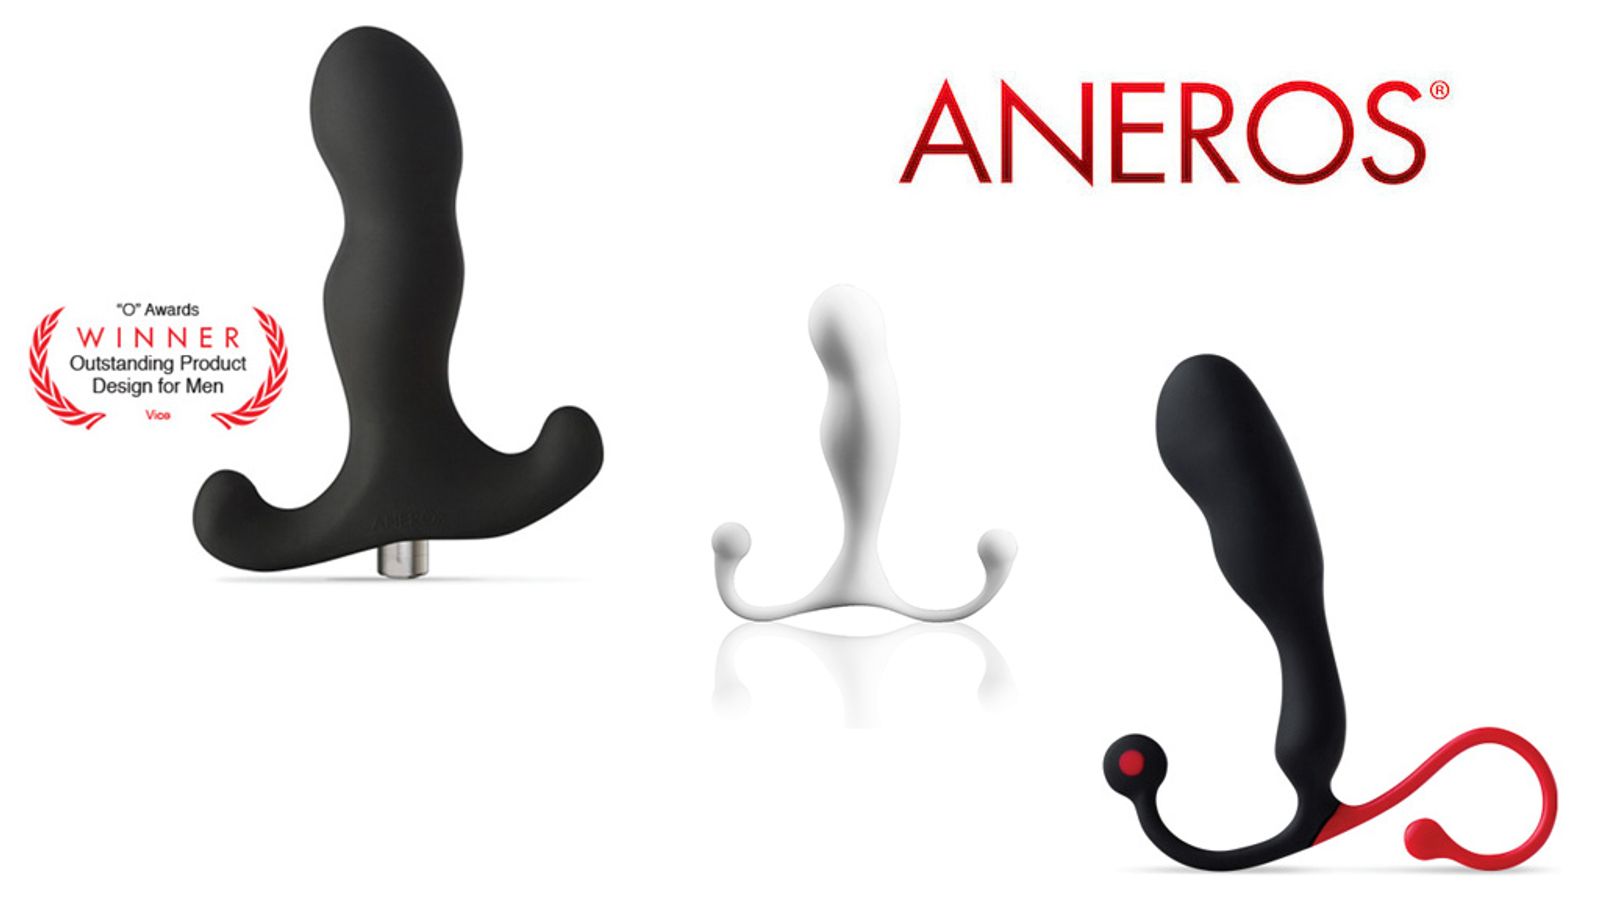 Aneros Reports: Prostate Massage Offers Several Health Benefits